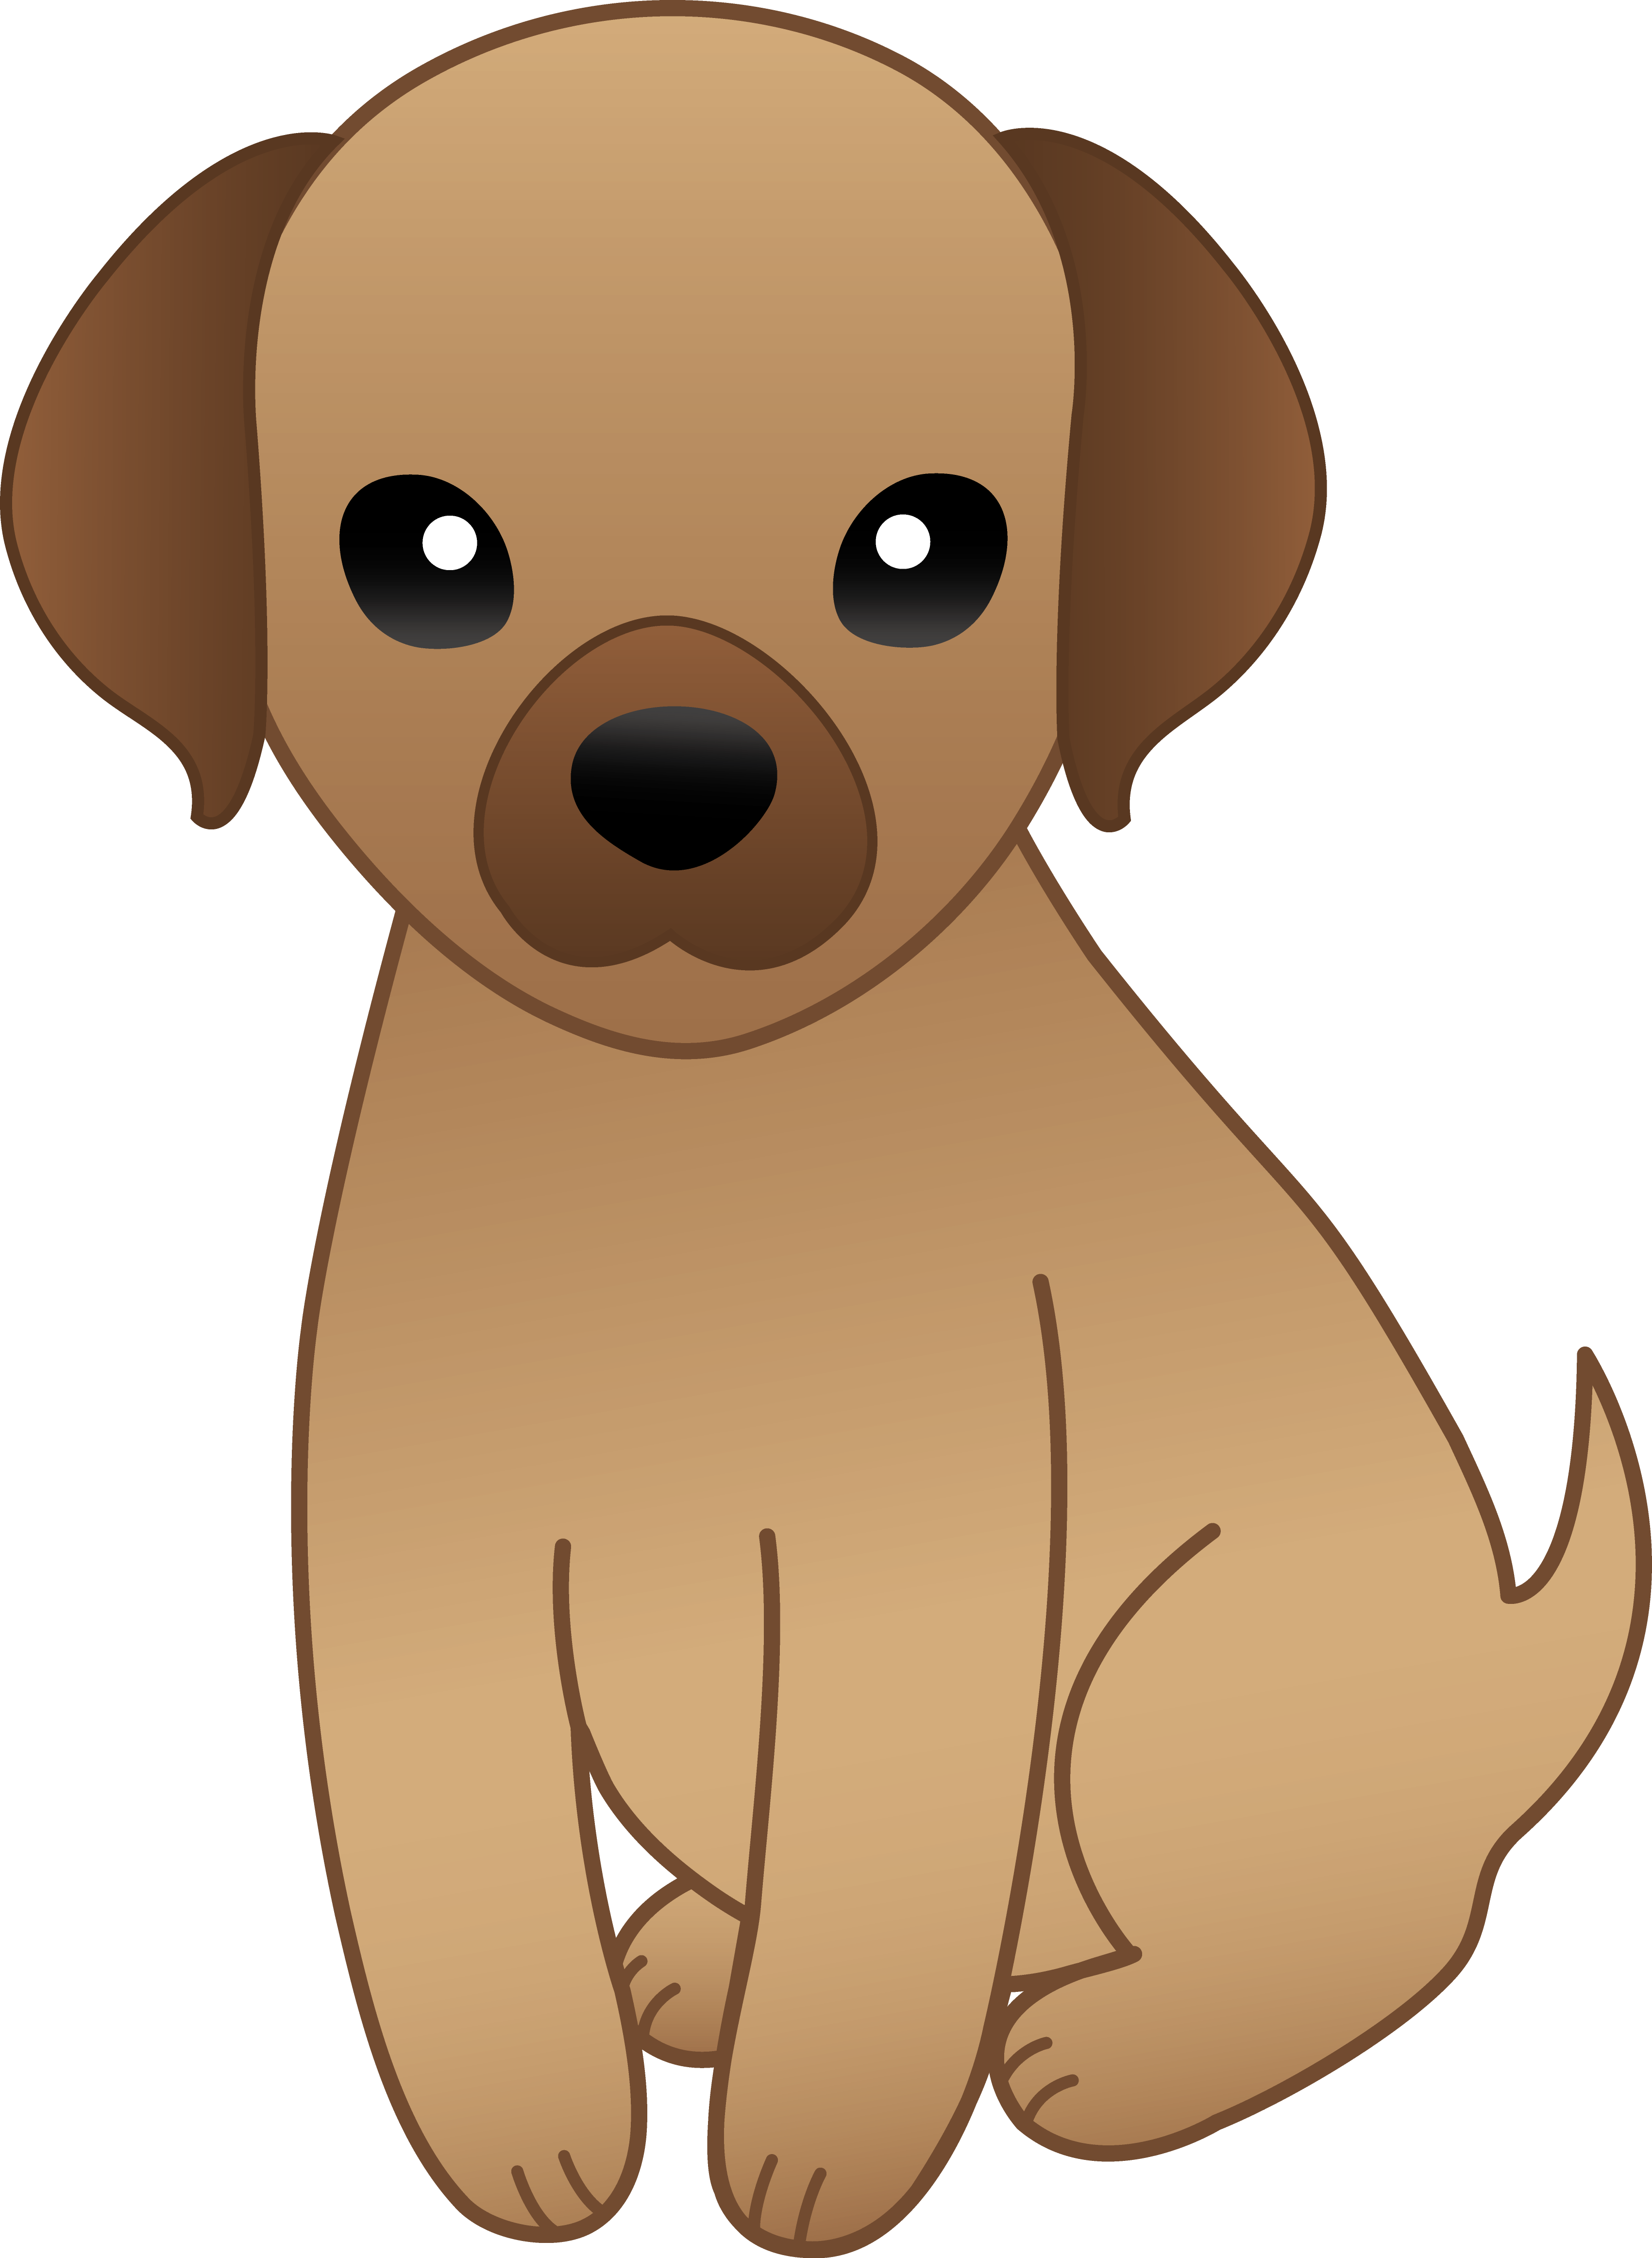 Animated Dog PNG HD Transparent Animated Dog HD.PNG Images. | PlusPNG